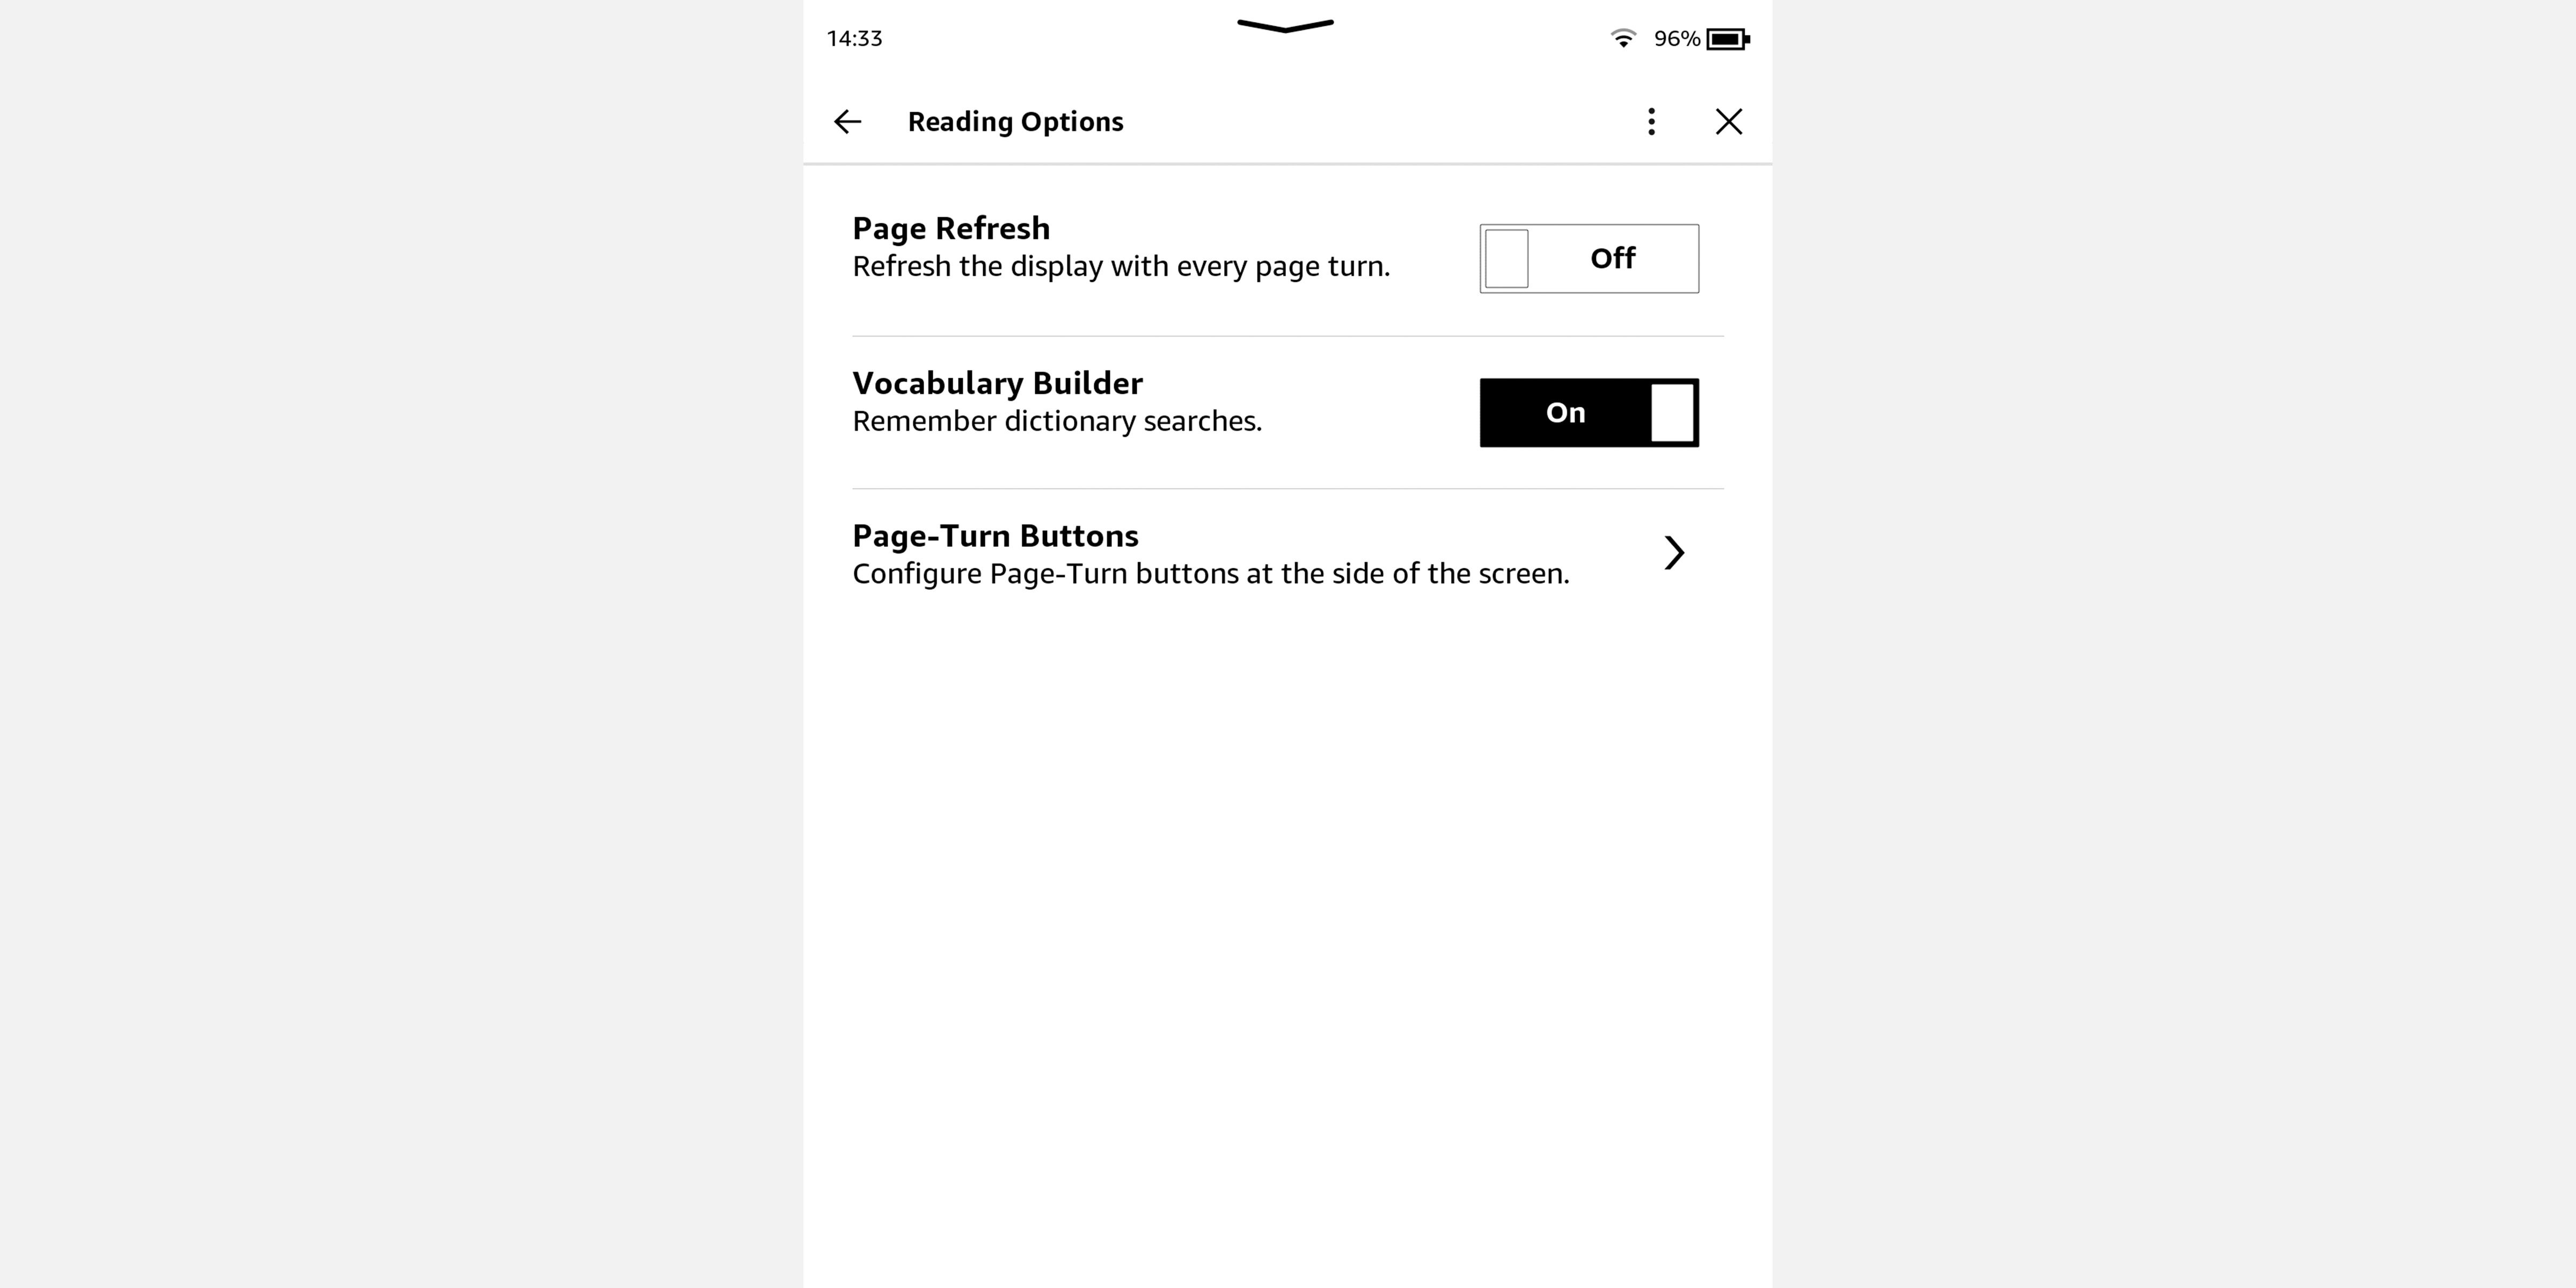 Screenshot of Amazon Kindle showing menu with Vocabulary Builder